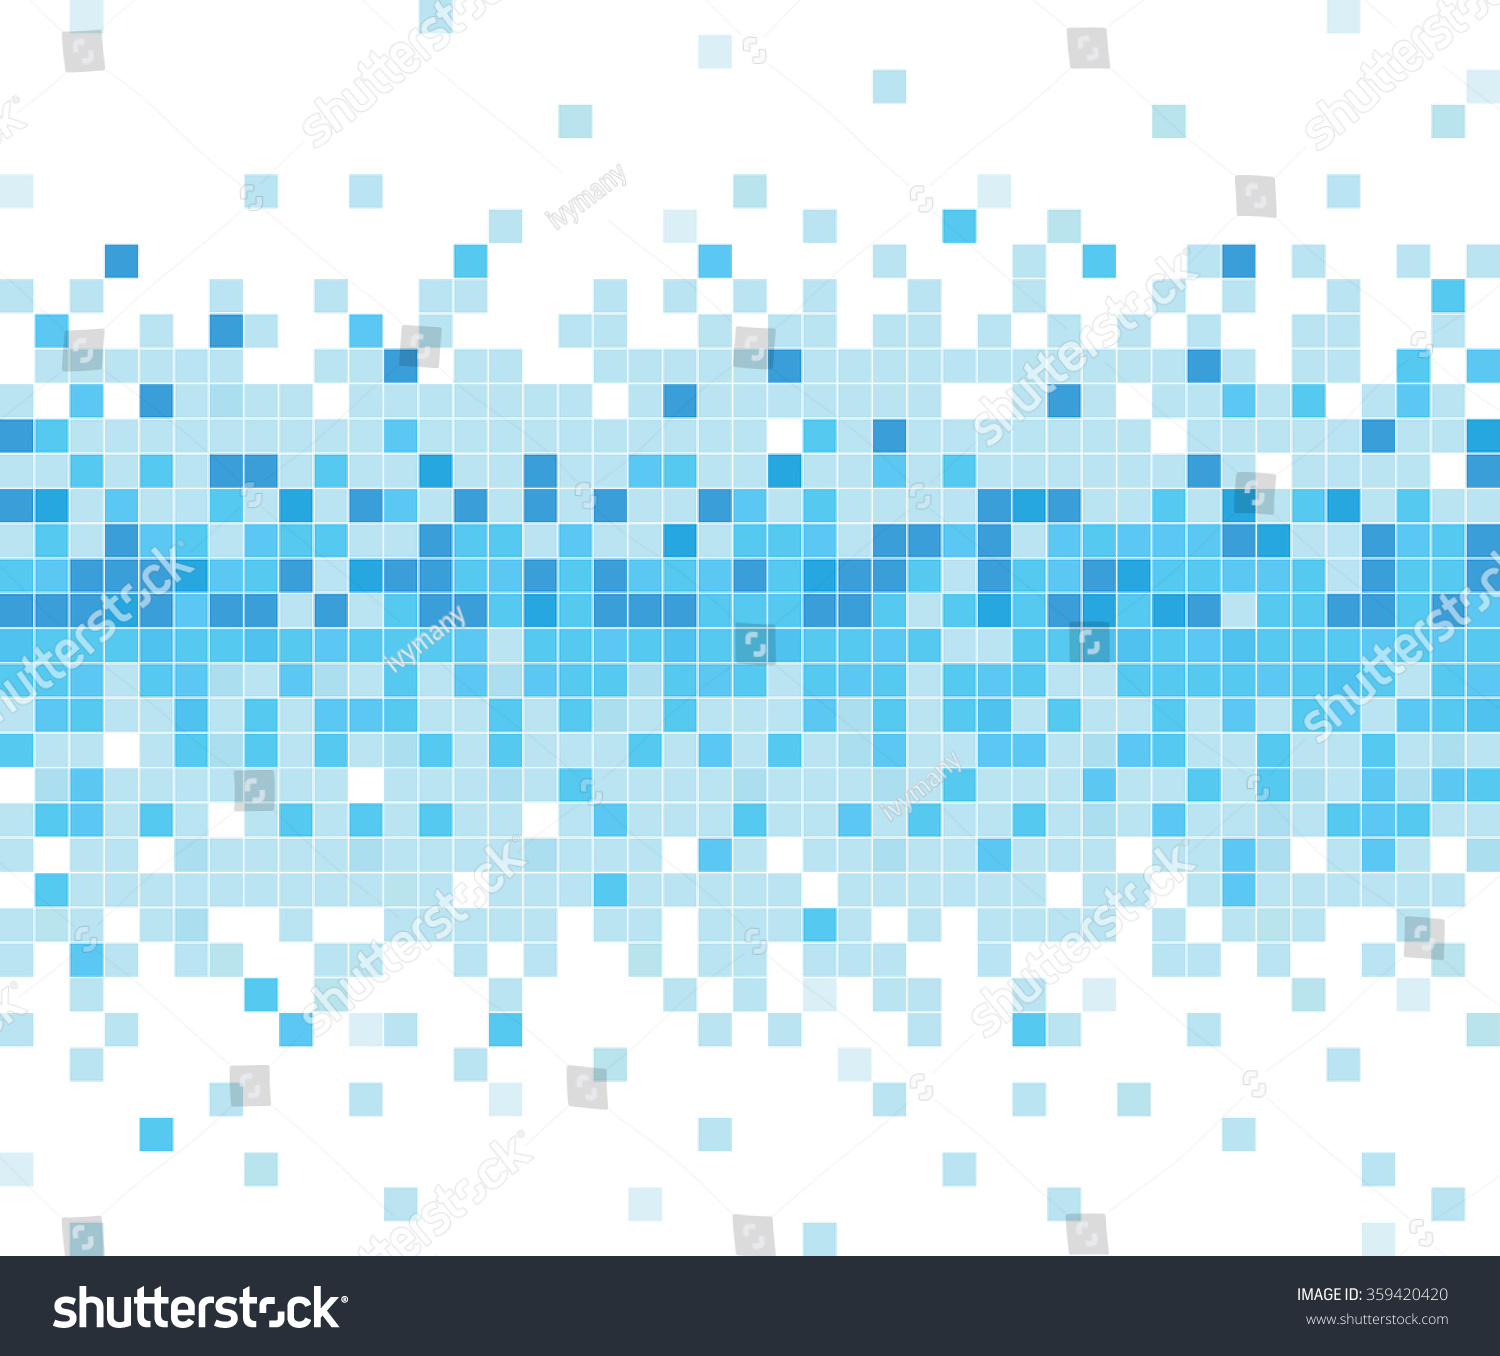 Abstract Data Flow Technology Check Pattern Stock Vector (Royalty Free ...